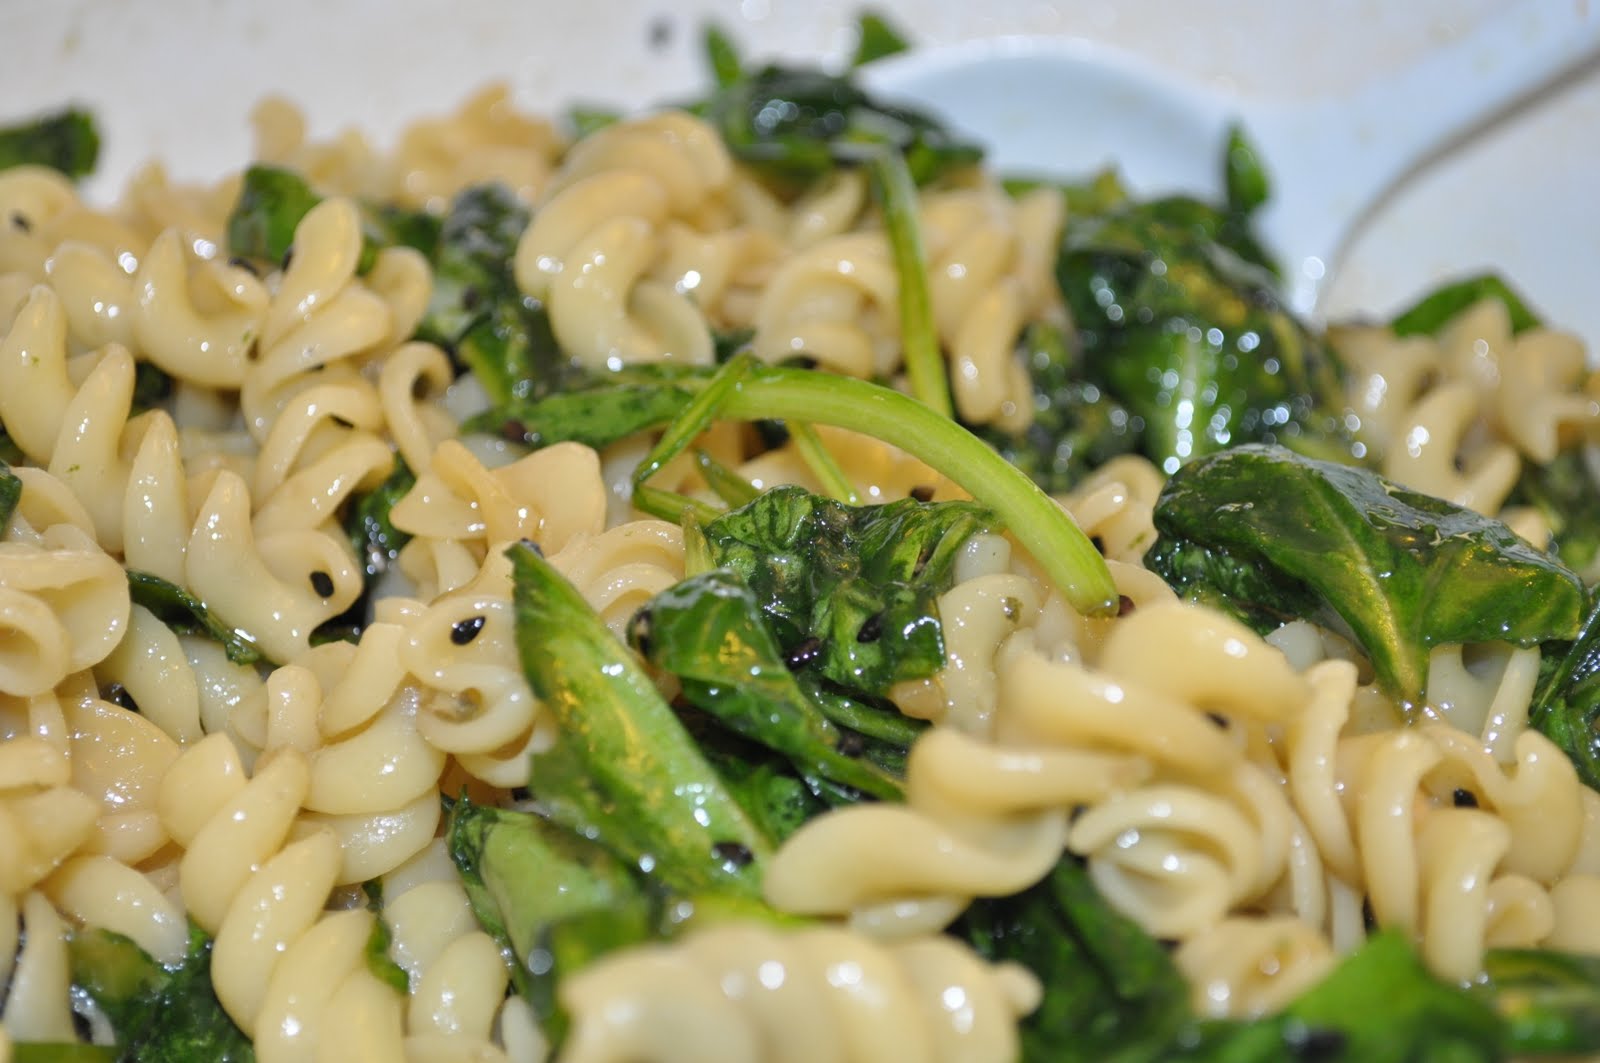 Peggy's Picks: Spinach Pasta Salad with Asian Sesame Dressing